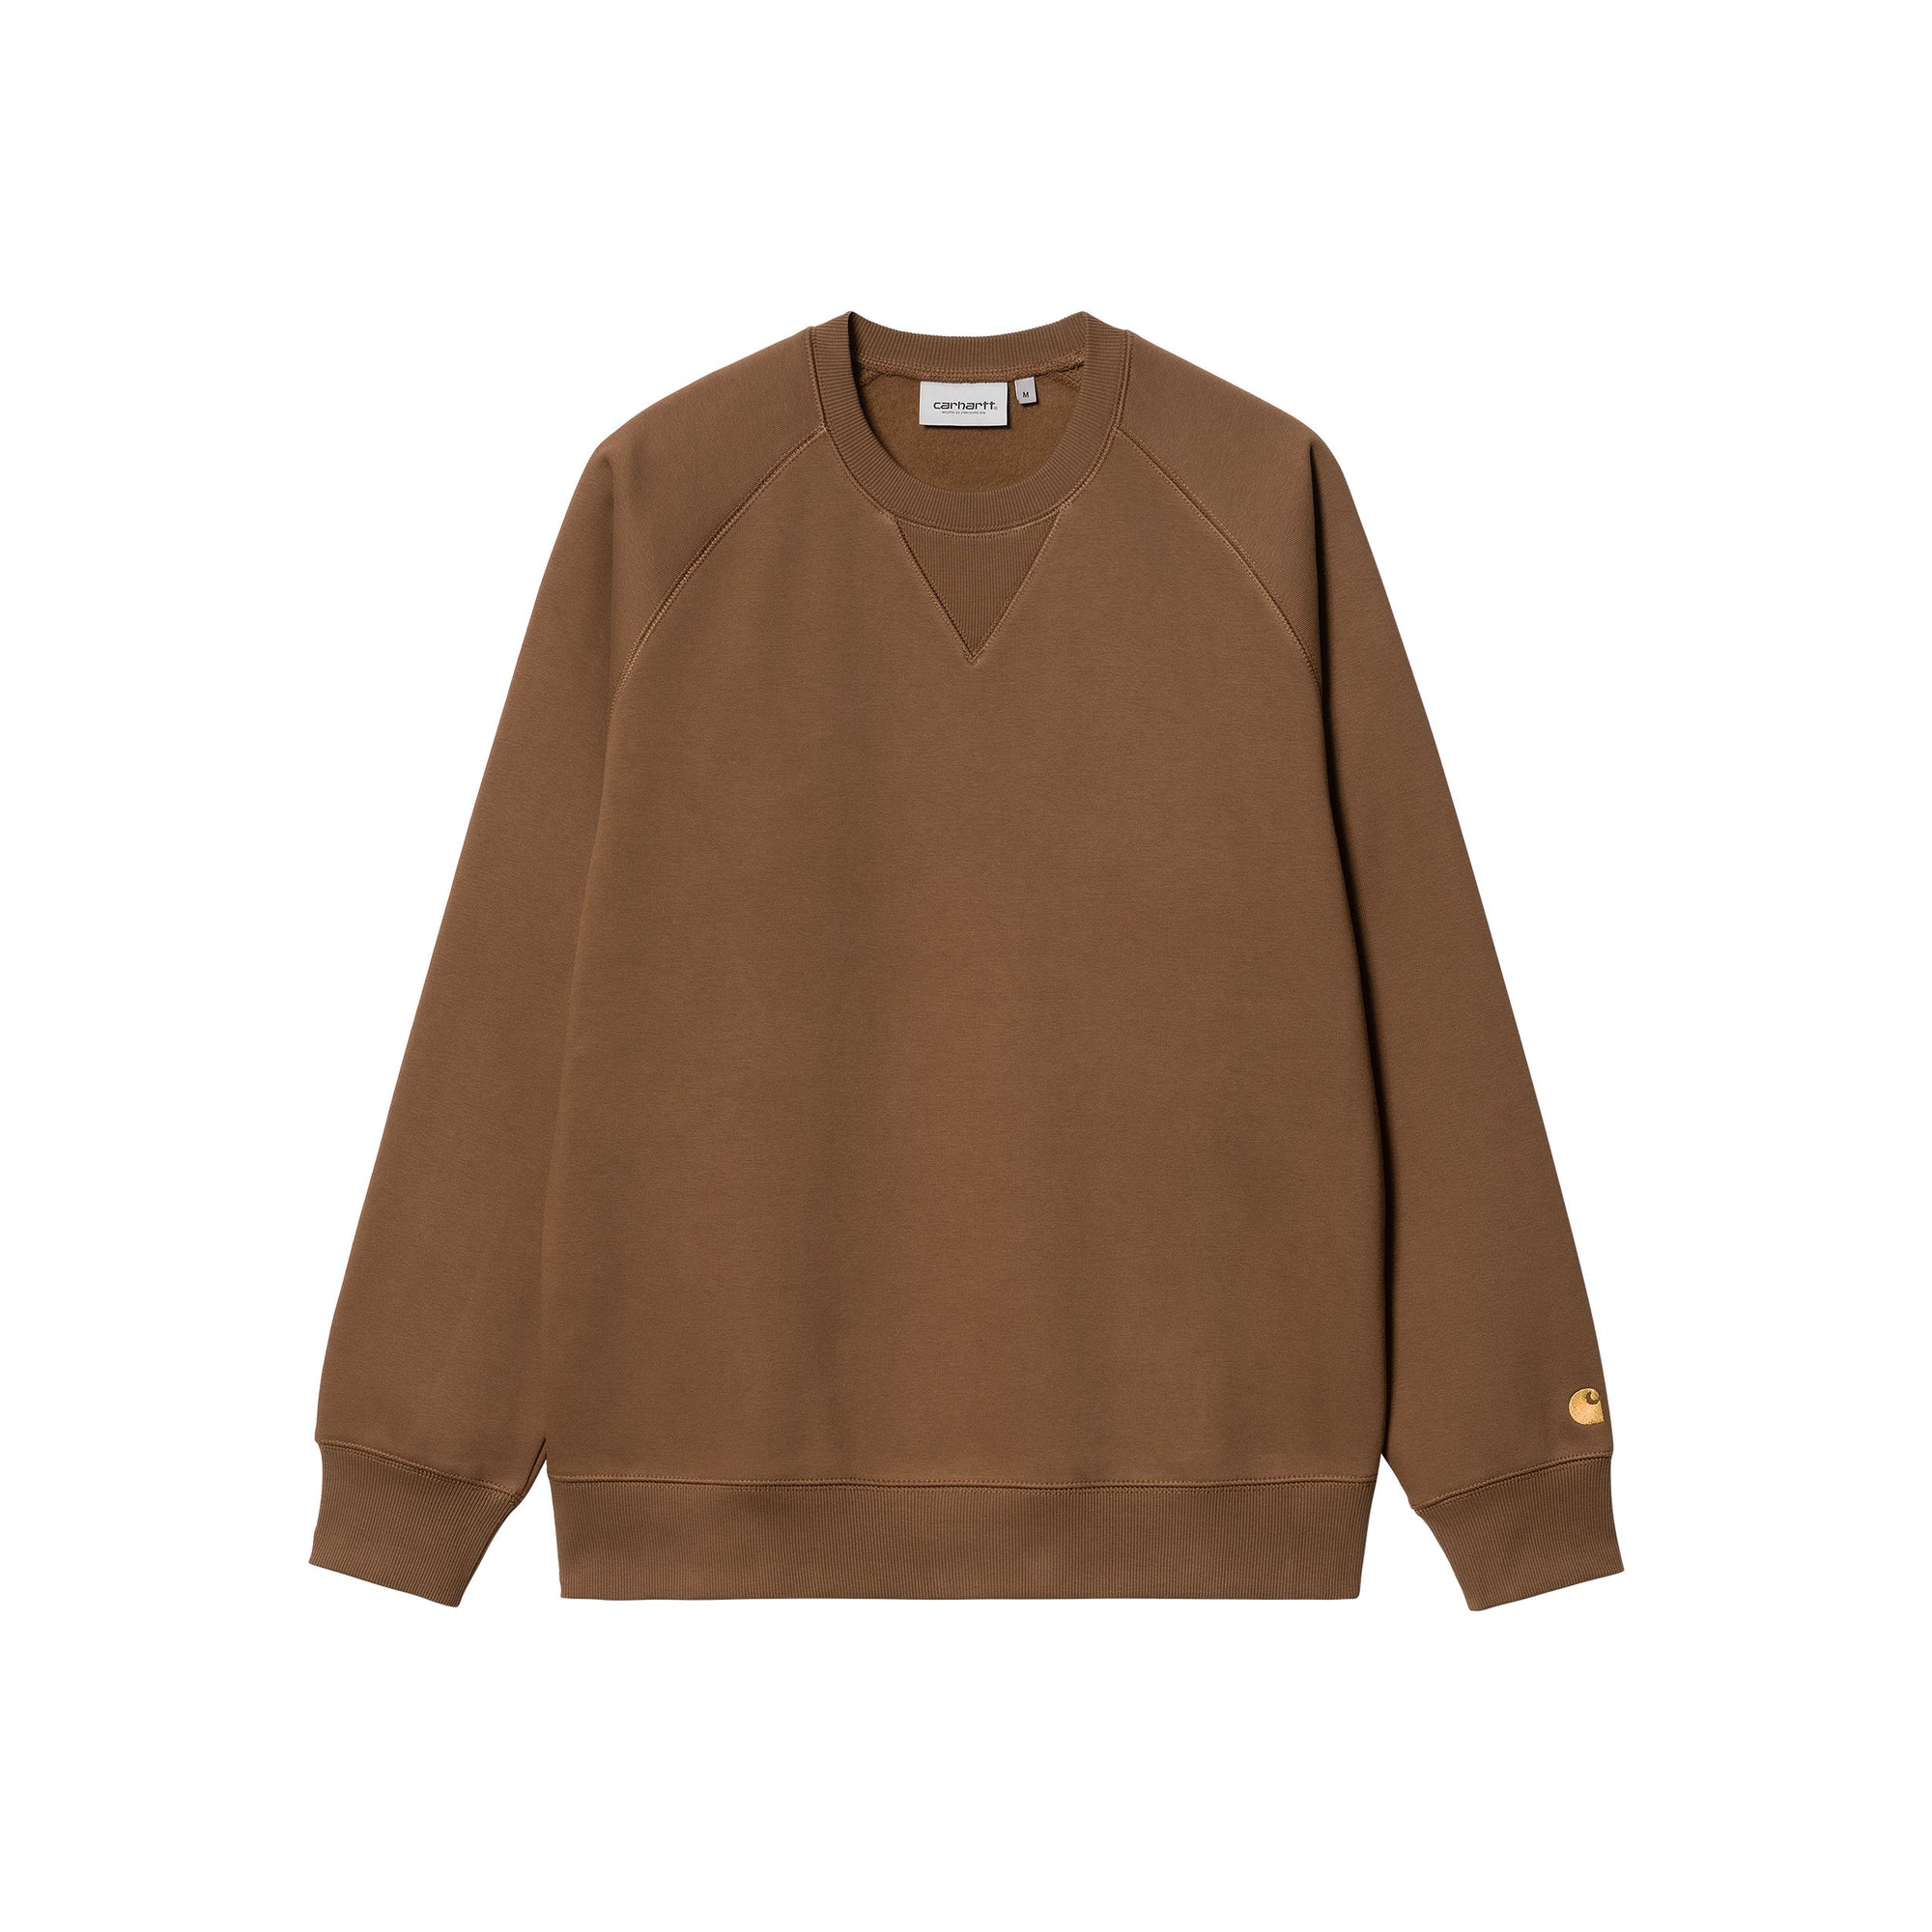 Carhartt WIP Chase Sweat (tamarind/gold) - Blue Mountain Store